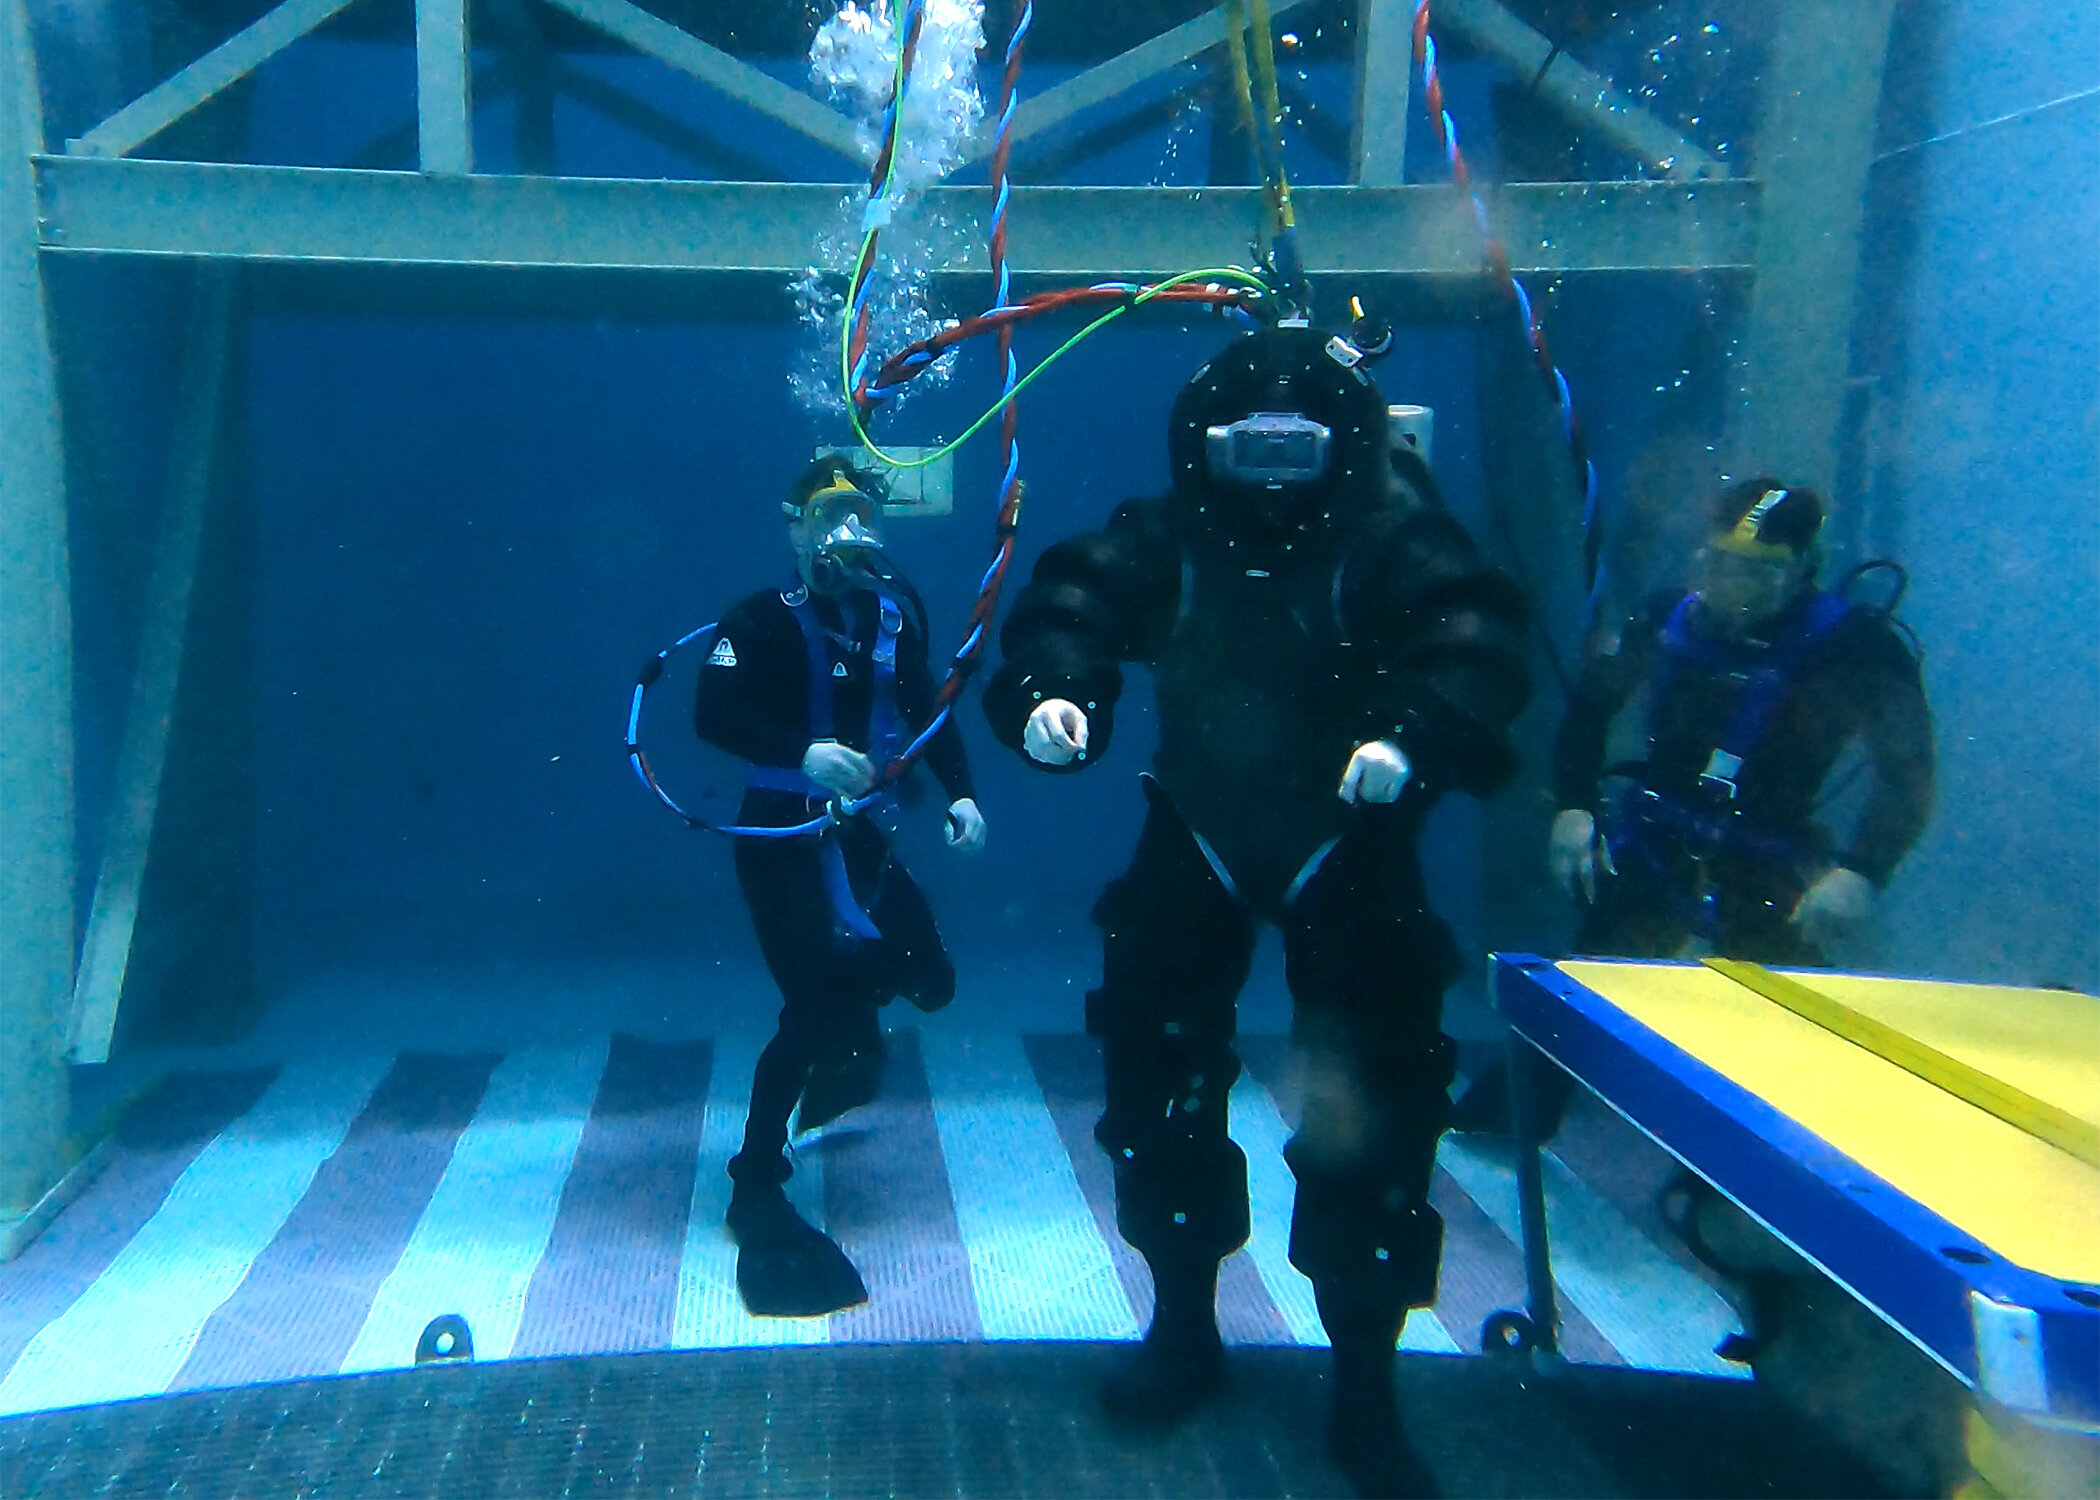 Deep impact: New diving suit could increase undersea range of Navy divers